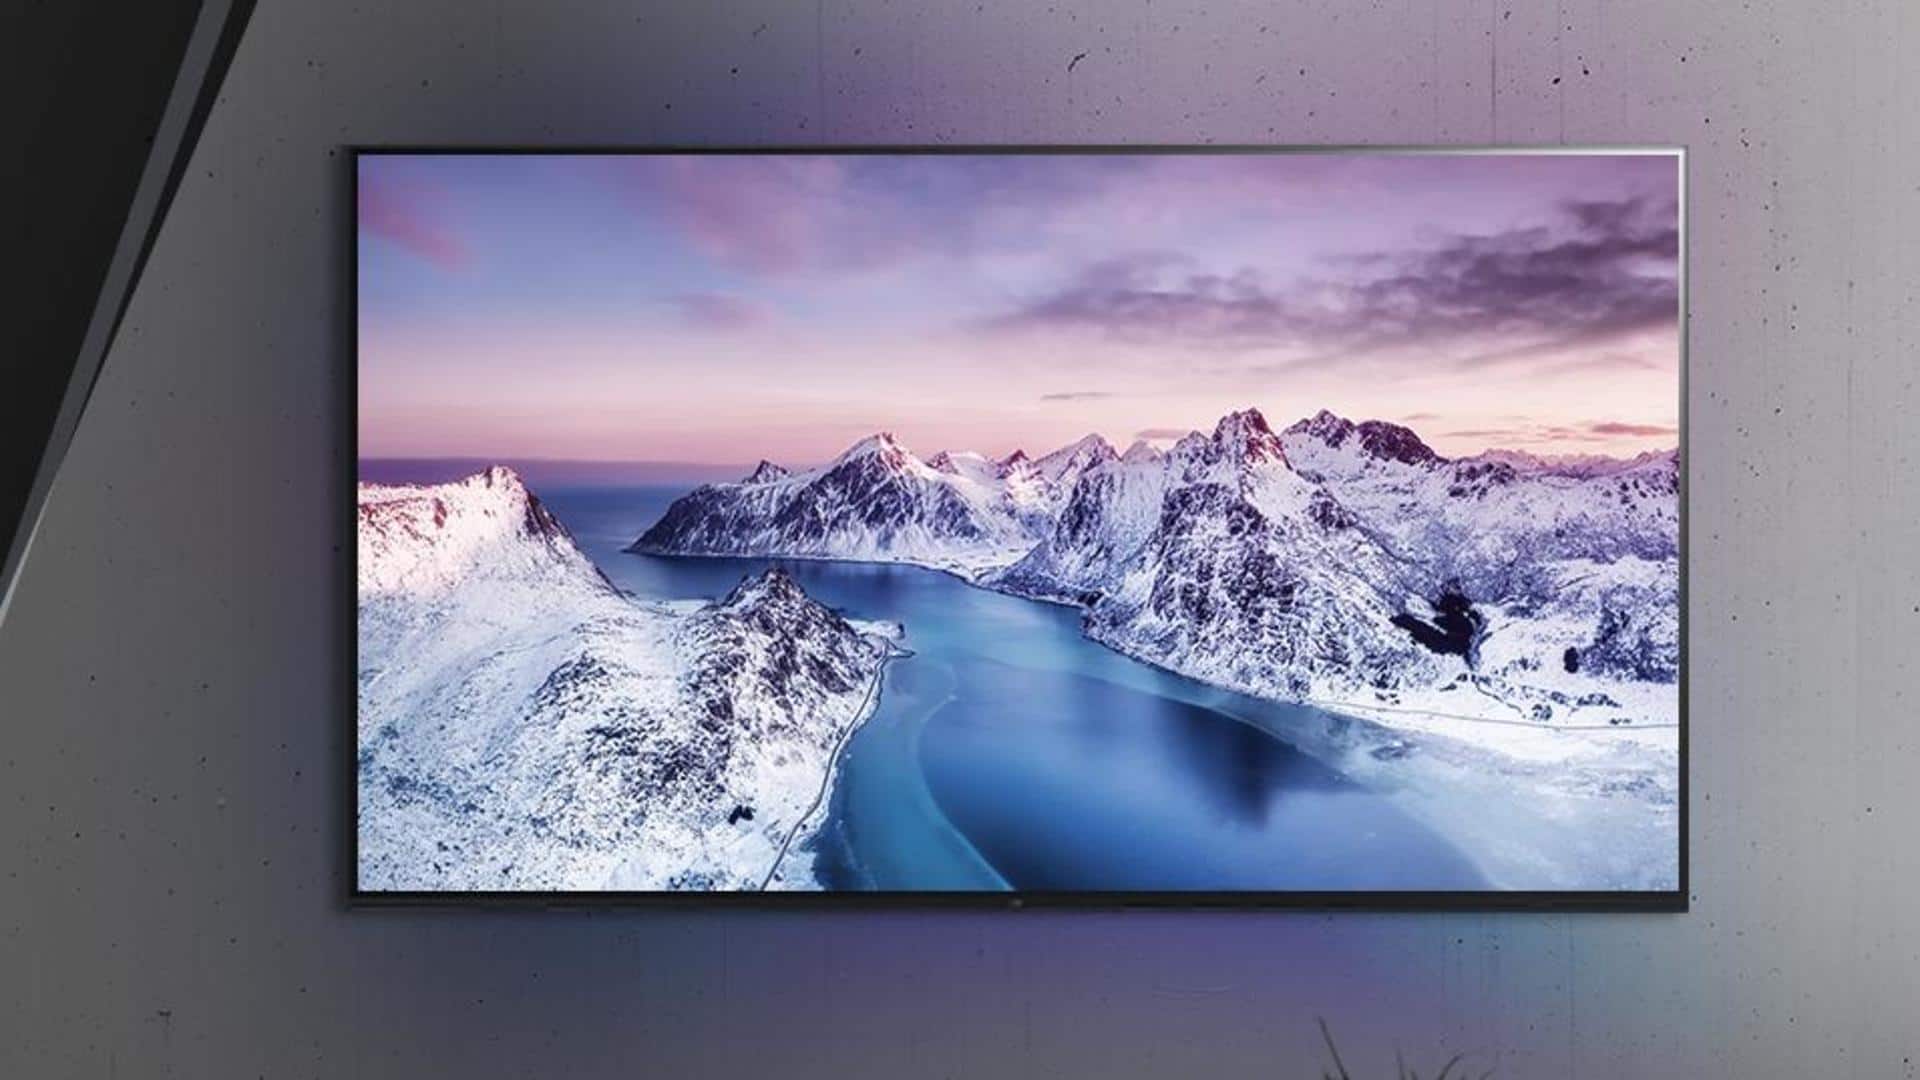 Limited-time Amazon deal! 65-inch LG smart TV is 48% off